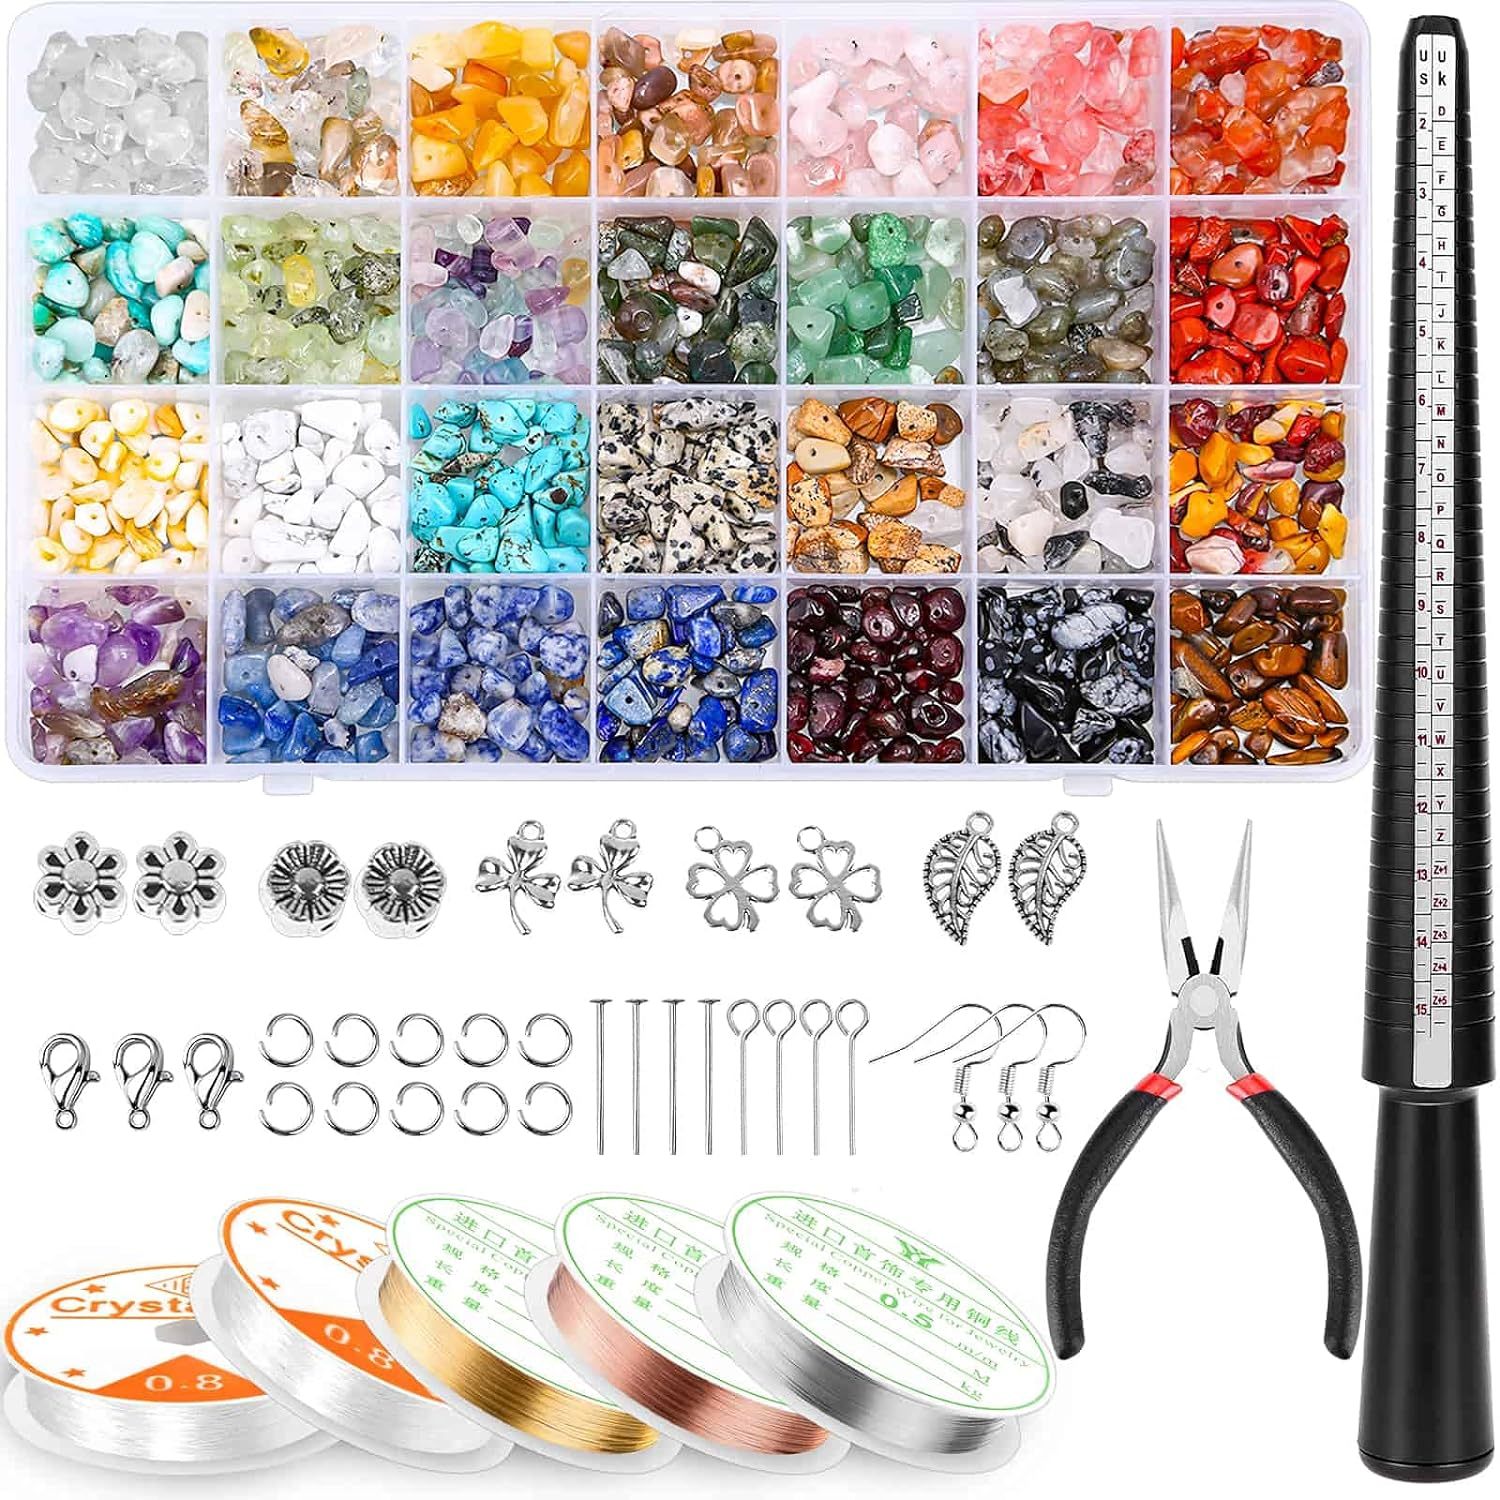 Primary image for Jewelry Making Kits For Adults Women With 28 Colors Crystal Beads, 1660Pcs Cryst